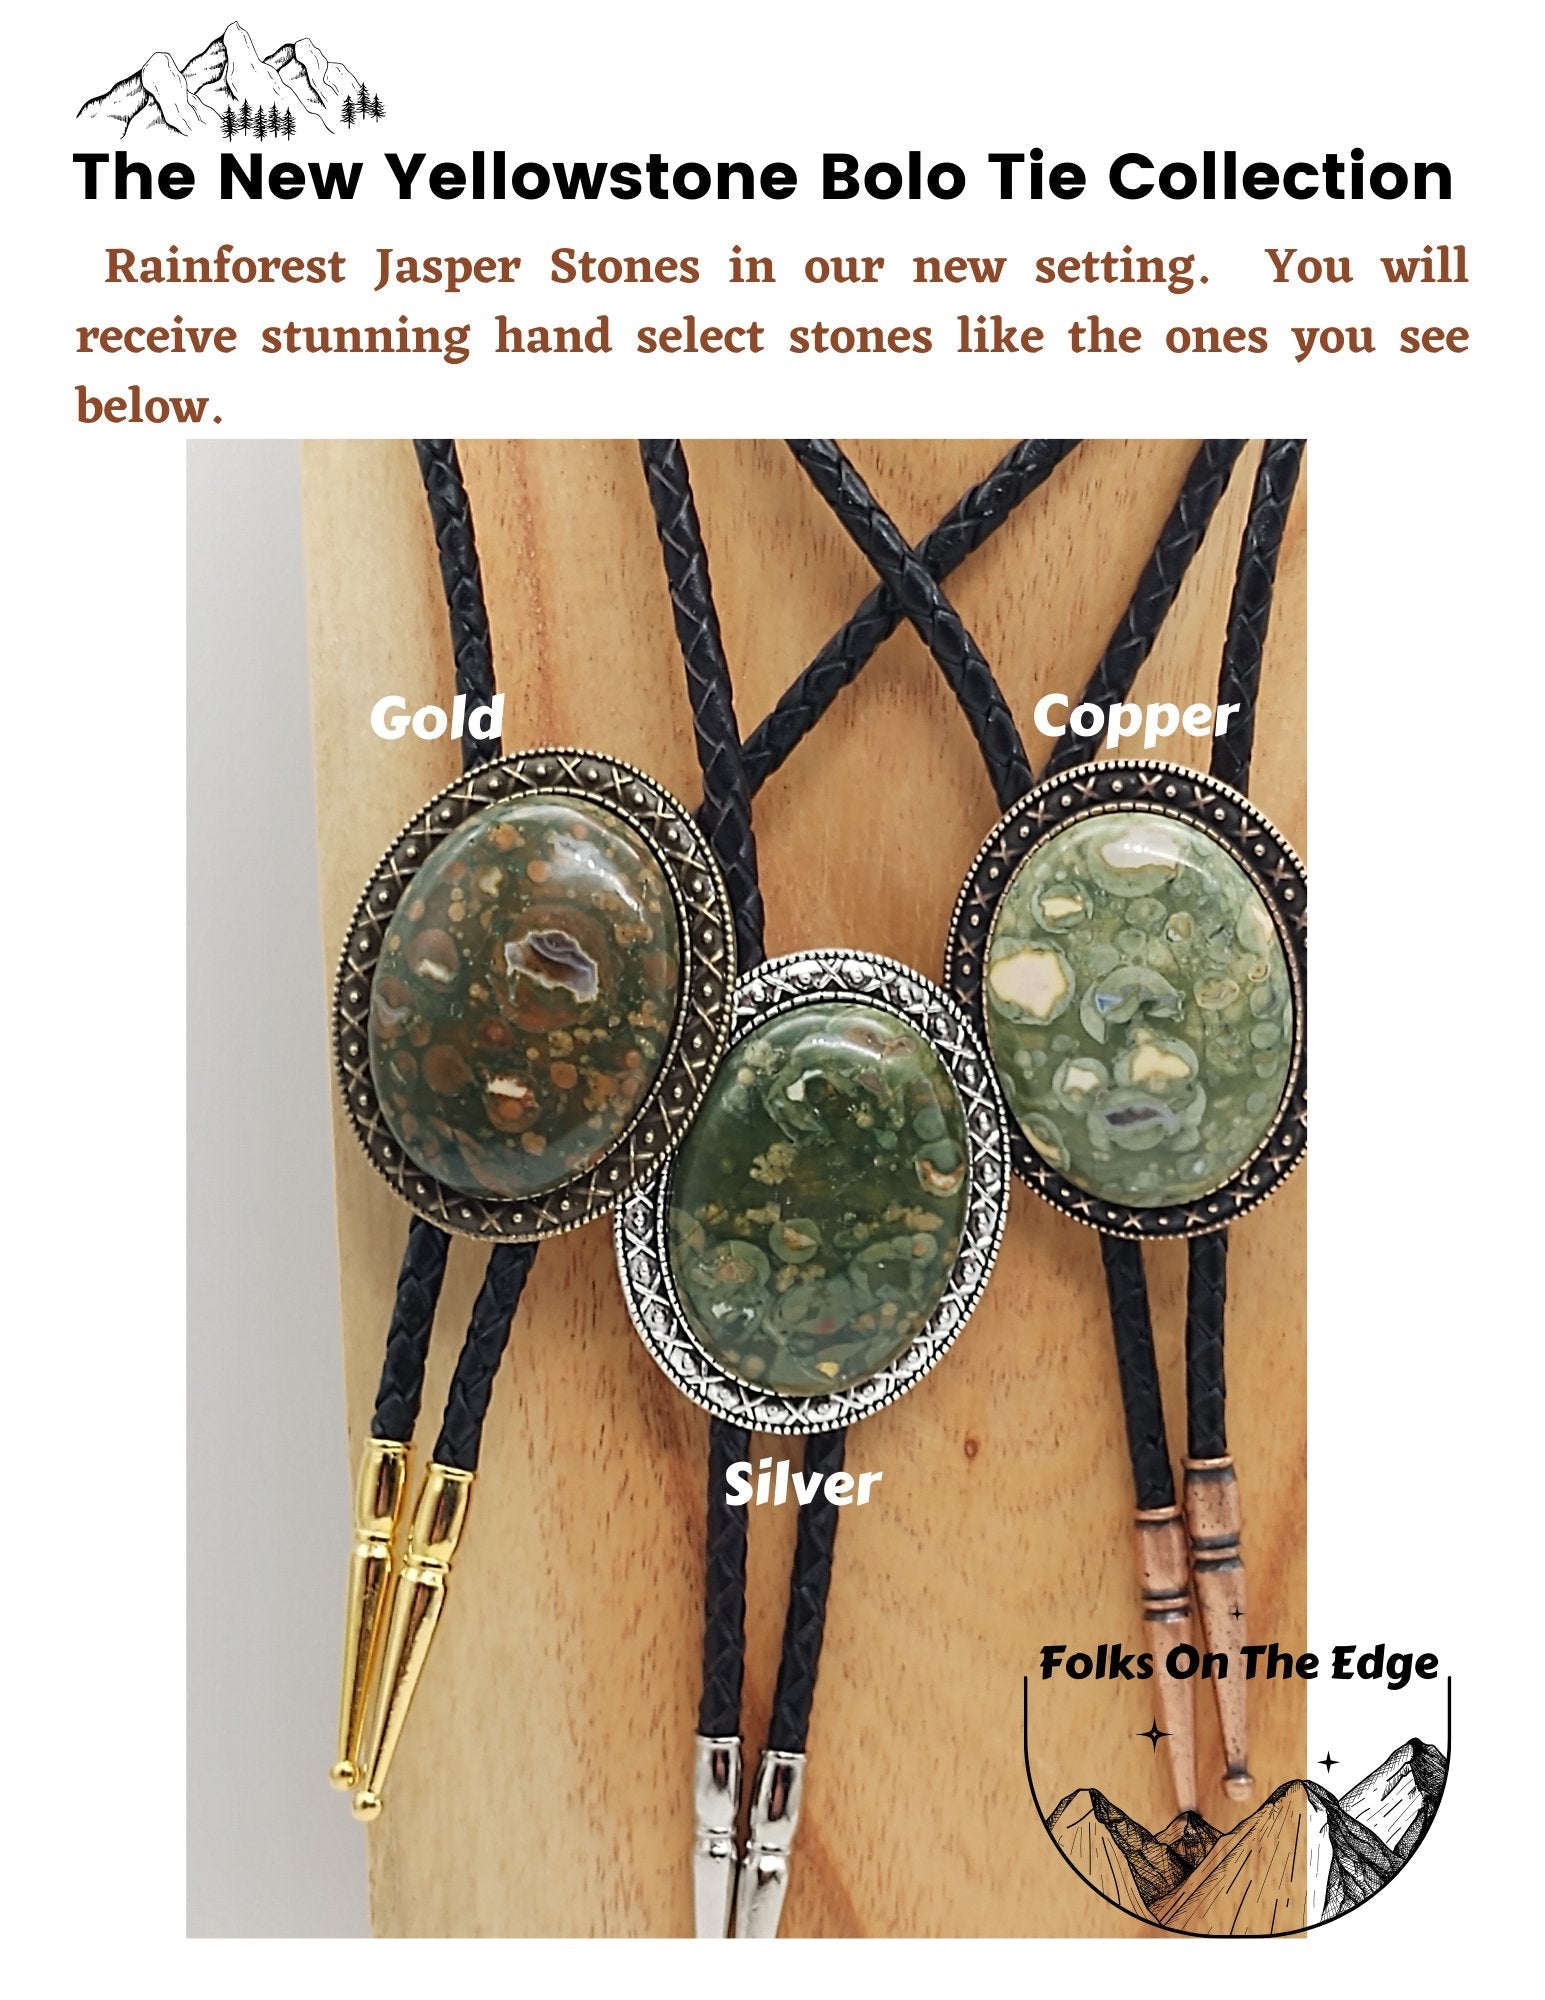 Yellowstone Bolo Tie with Rainforest Jasper Stone in Gold, Silver or Copper colors - Folks On The Edge